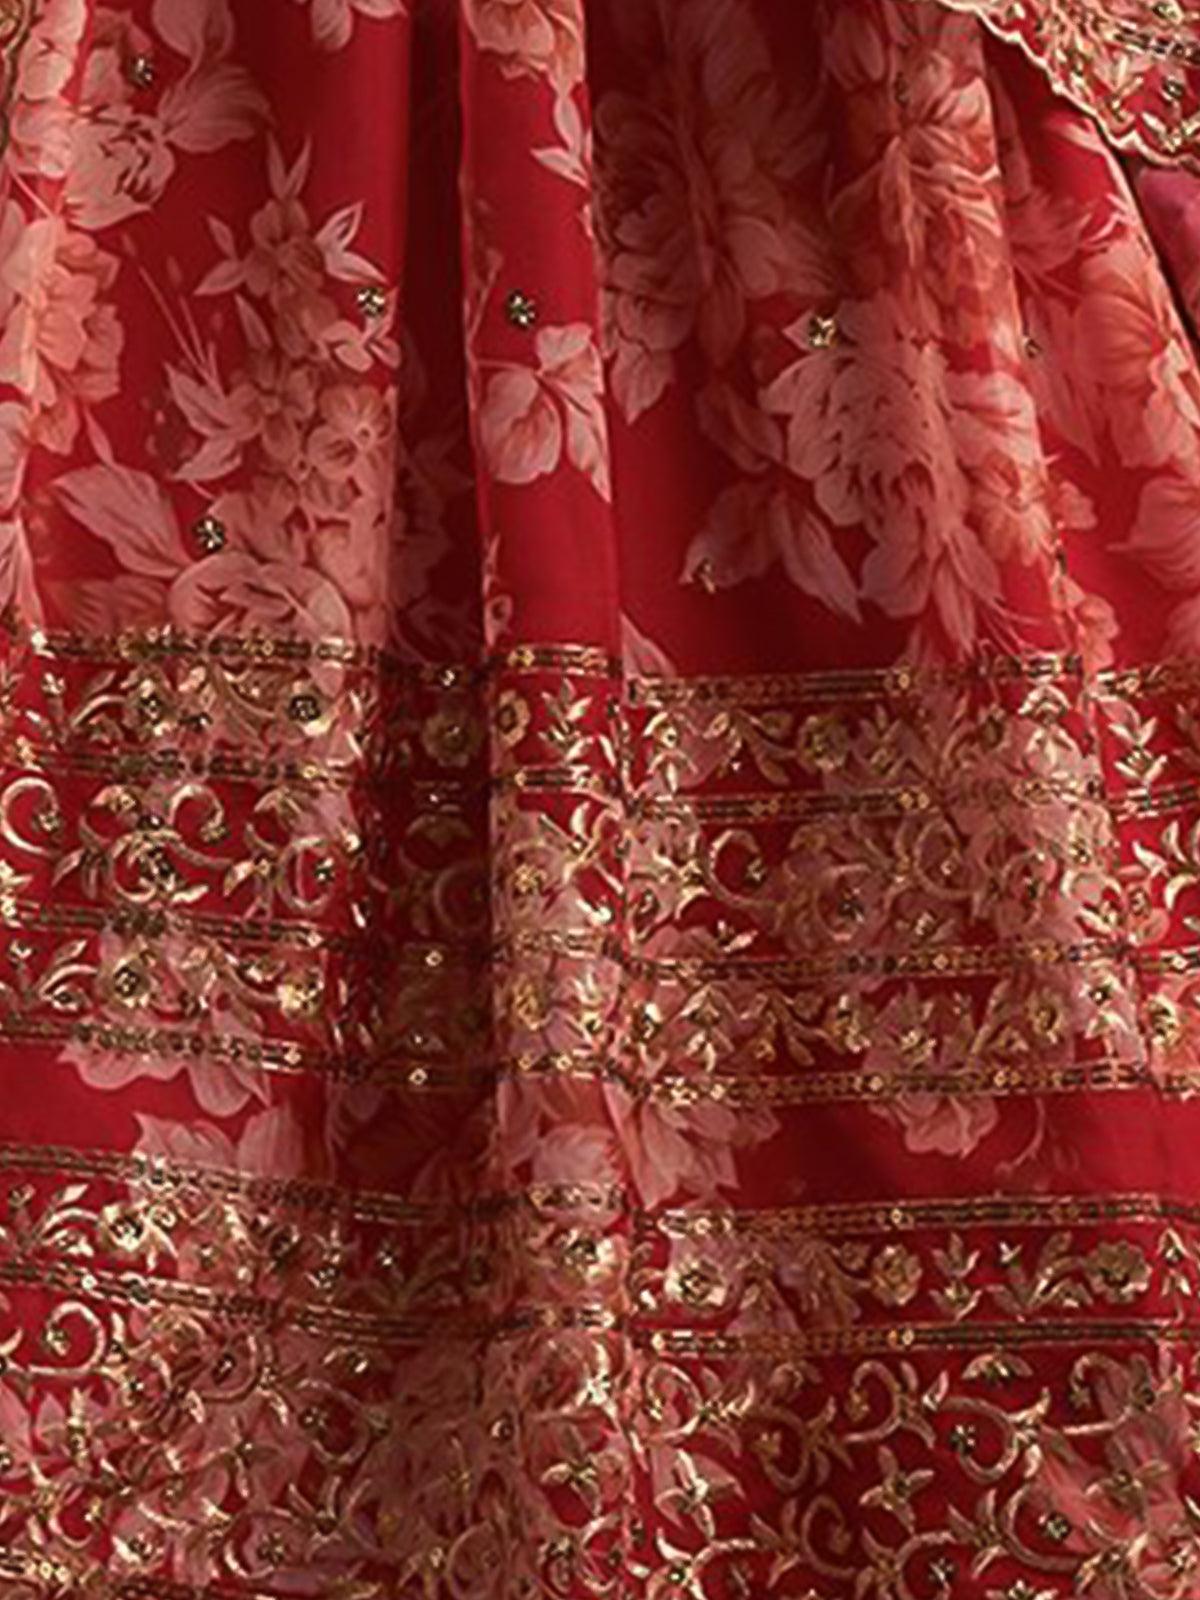 Persian red floral printed Lehenga Choli with Sequins Zari Embroidery Work - Odette